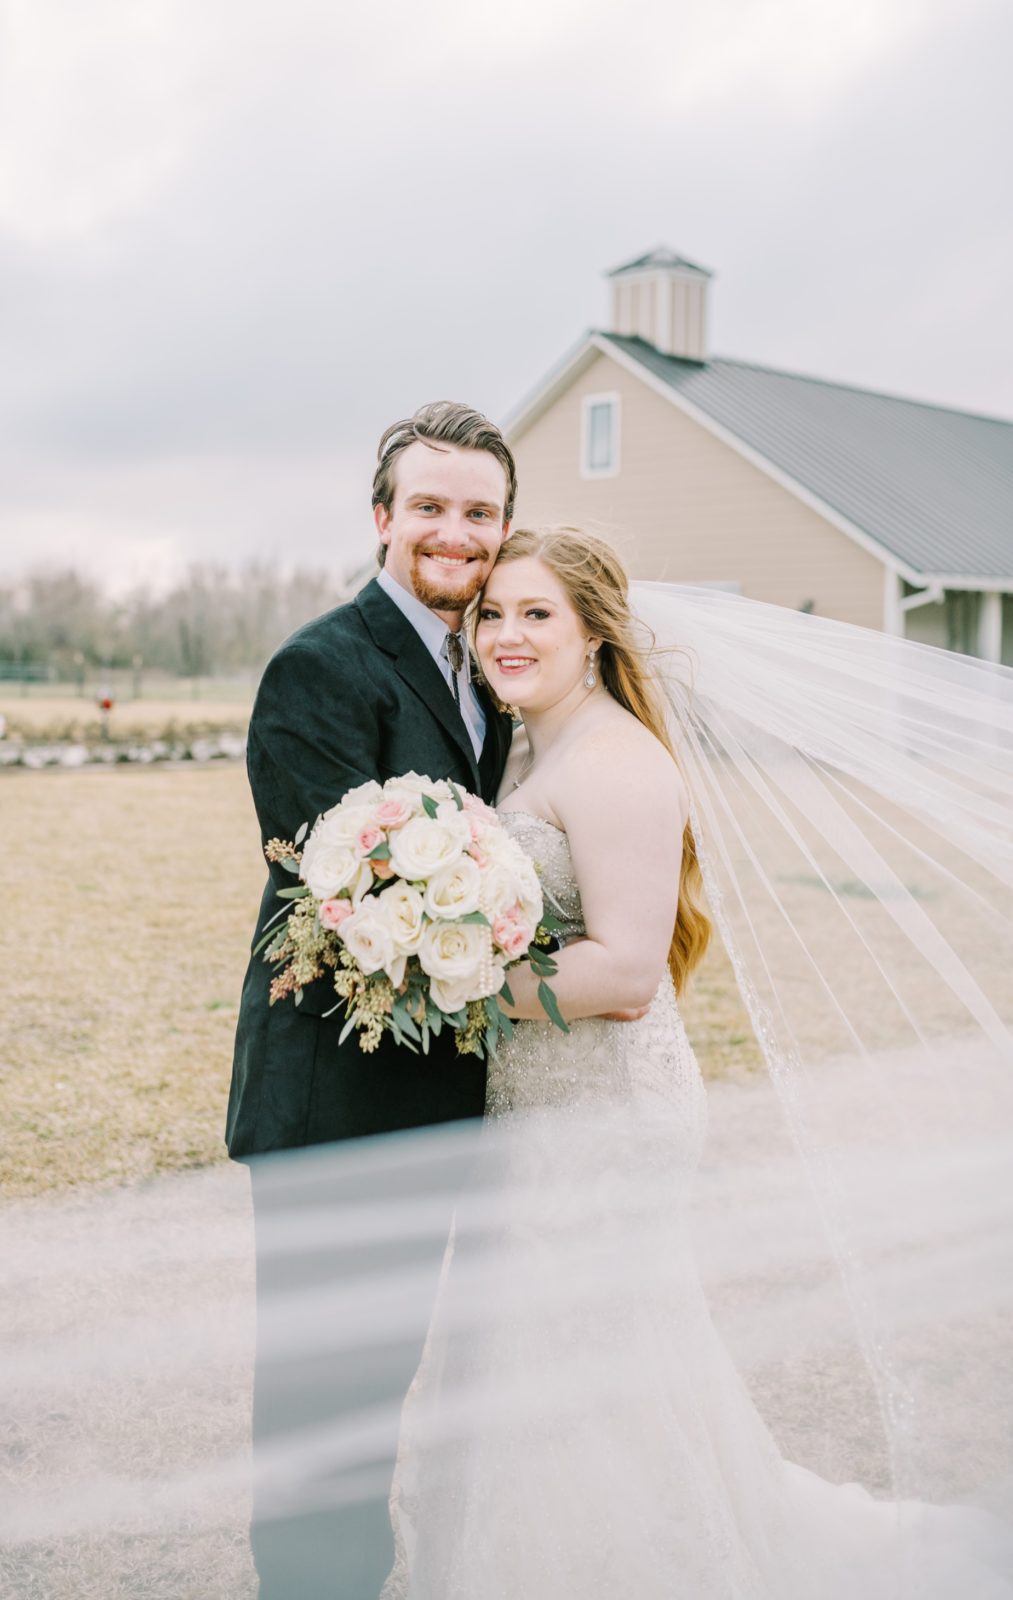 Sheer veil blowing in the wind in front of the bride and groom by Christina Elliott Photography. sheer veil blowing in wind #ChristinaElliottPhotography #ChristinaElliottWeddings #StillWatersRanchWedding #Texasweddings #countrywedding #ranchwedding